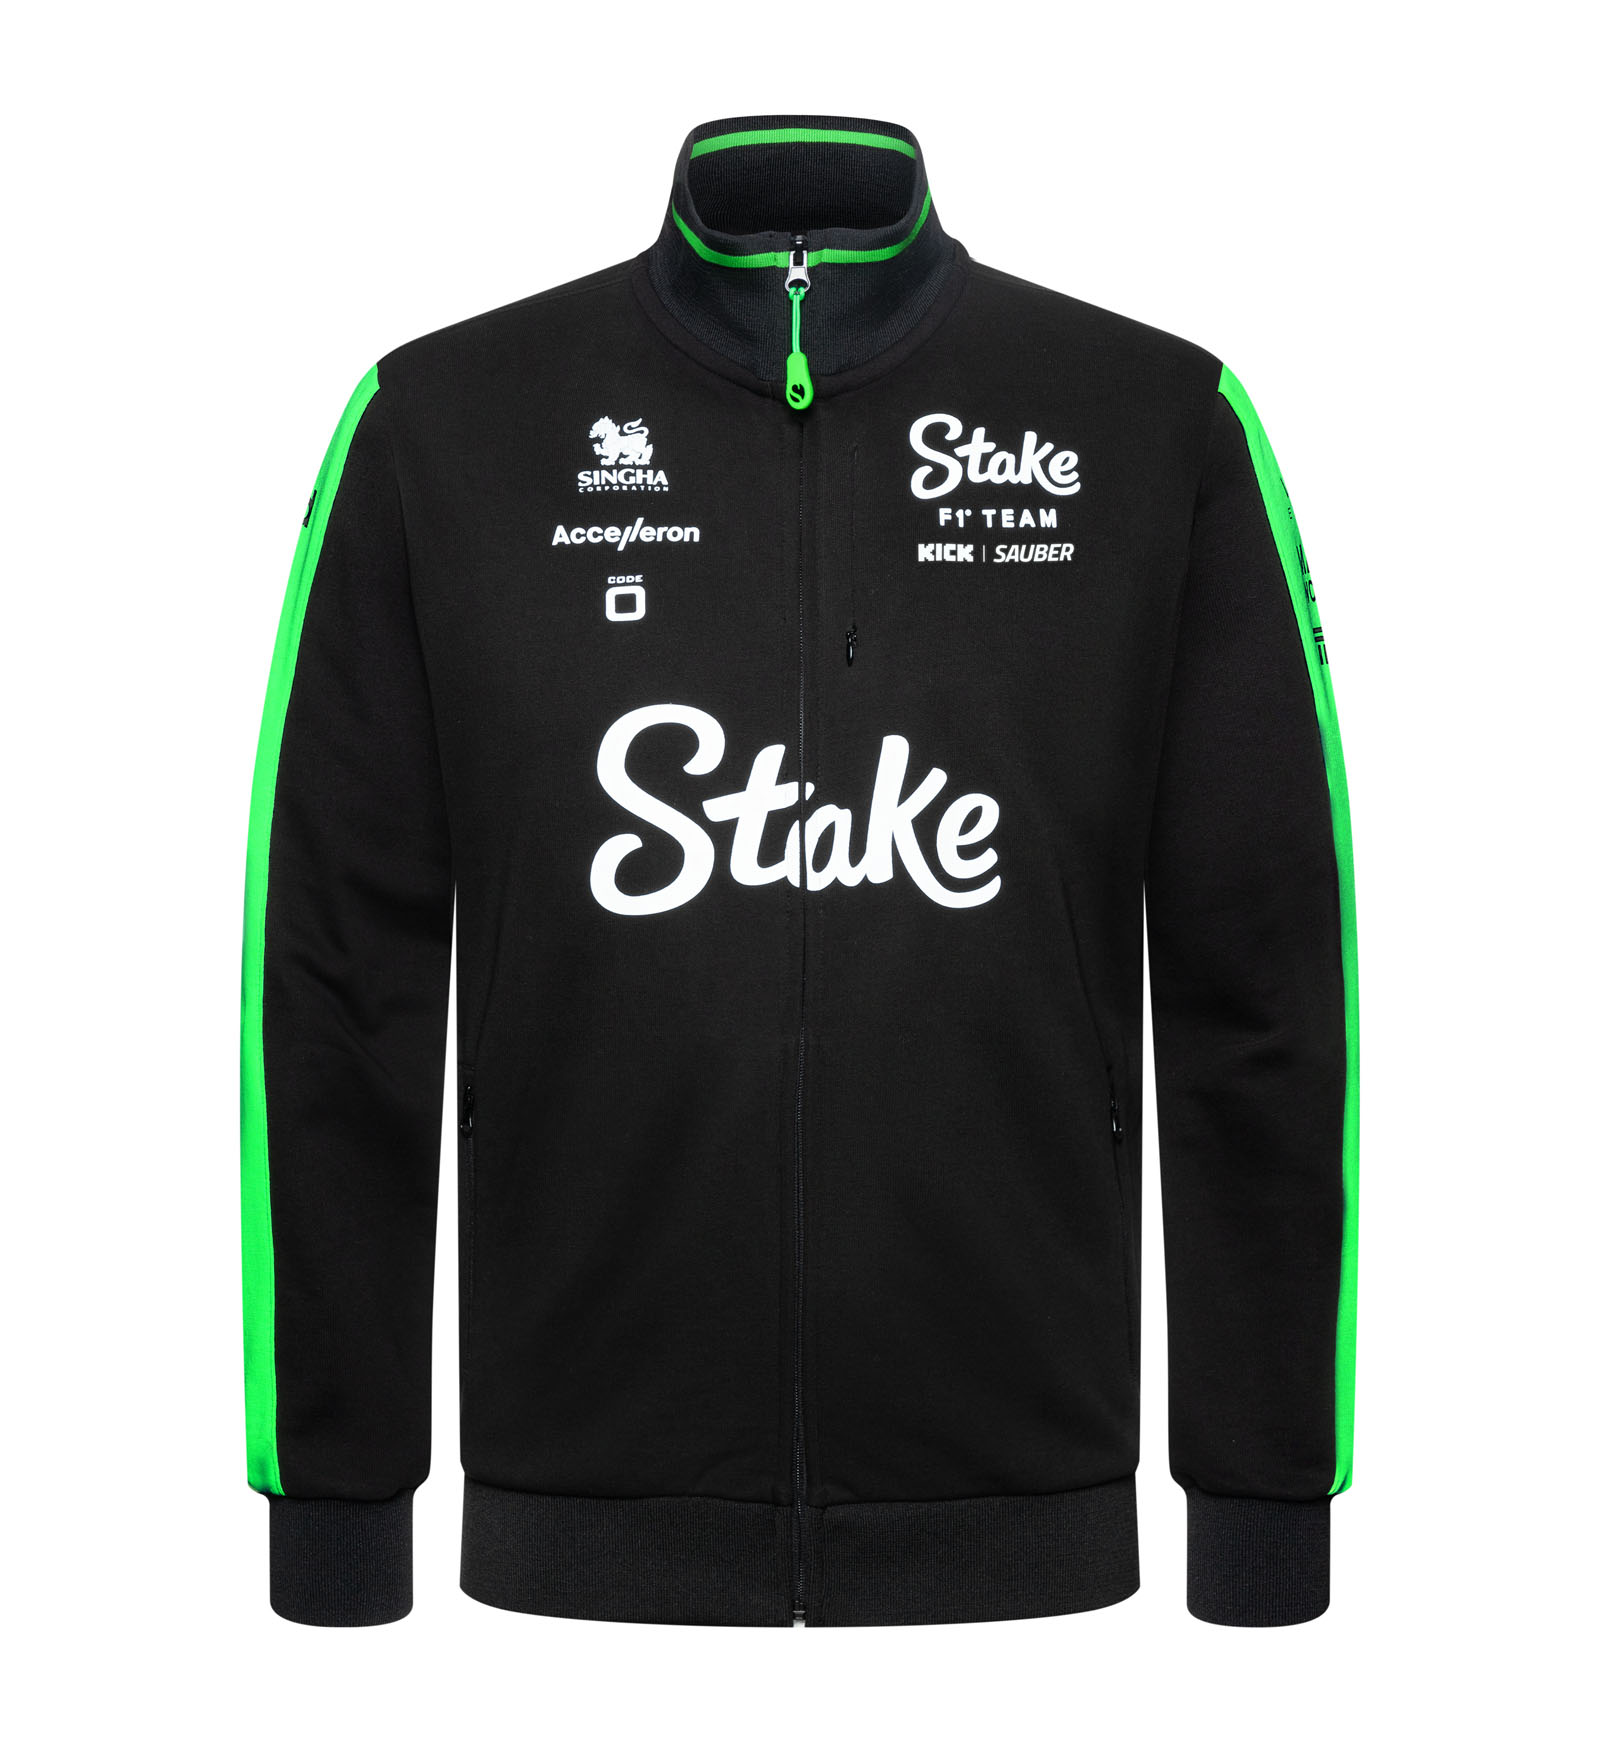 Stake F1 Team KICK Sauber | Official Store